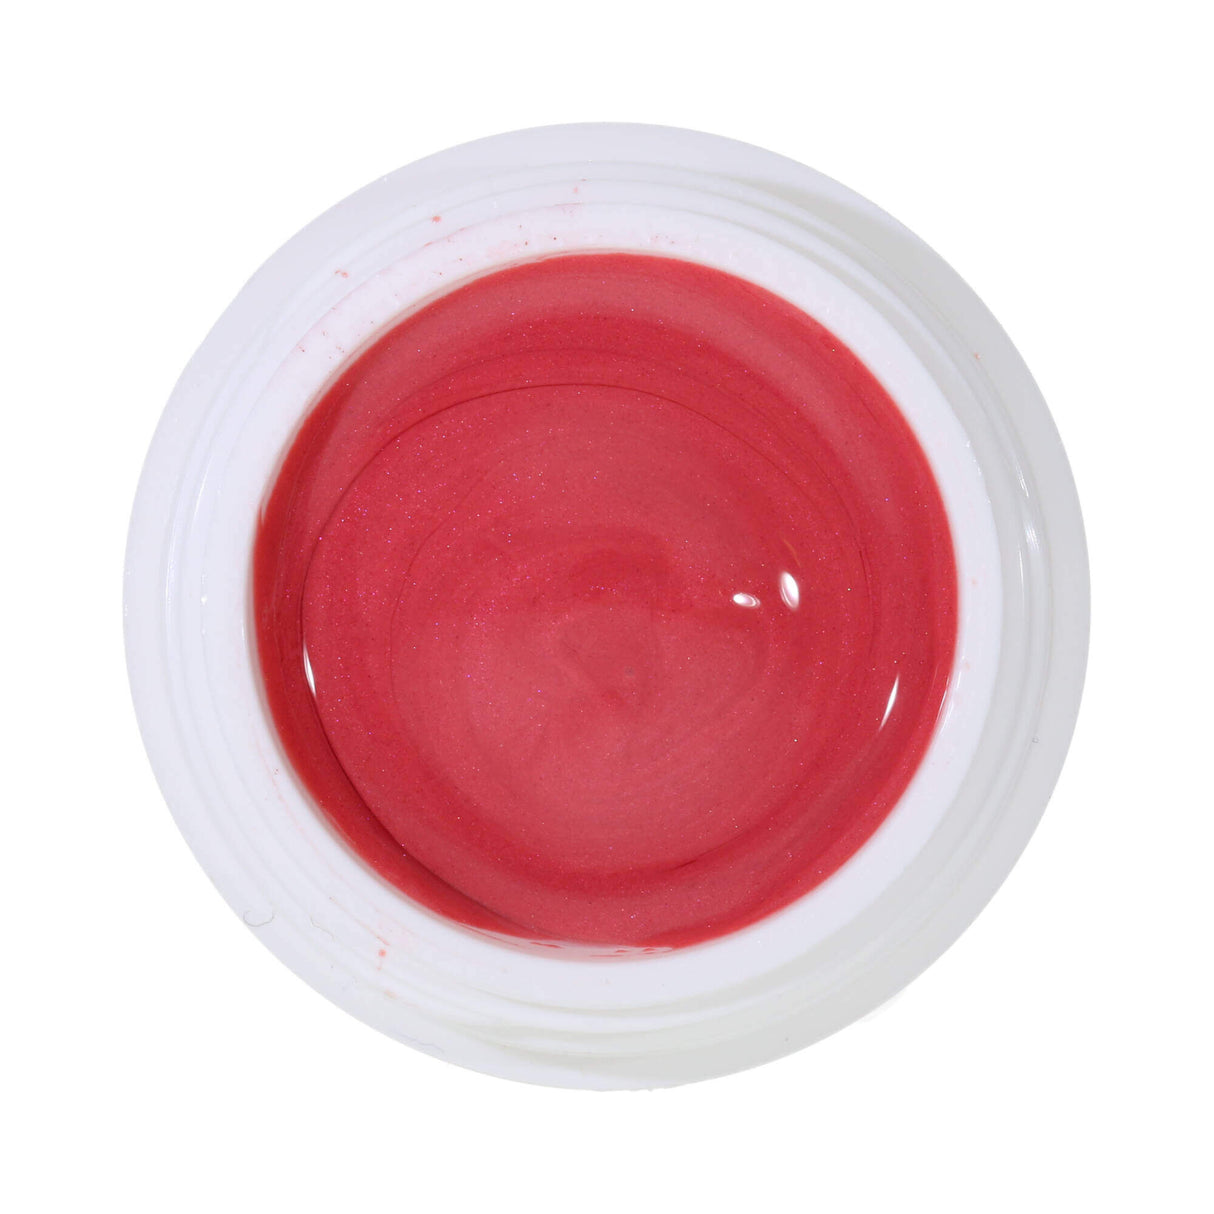 # 300 Premium EFFEKT Color Gel 5ml Pale raspberry red with a shimmer